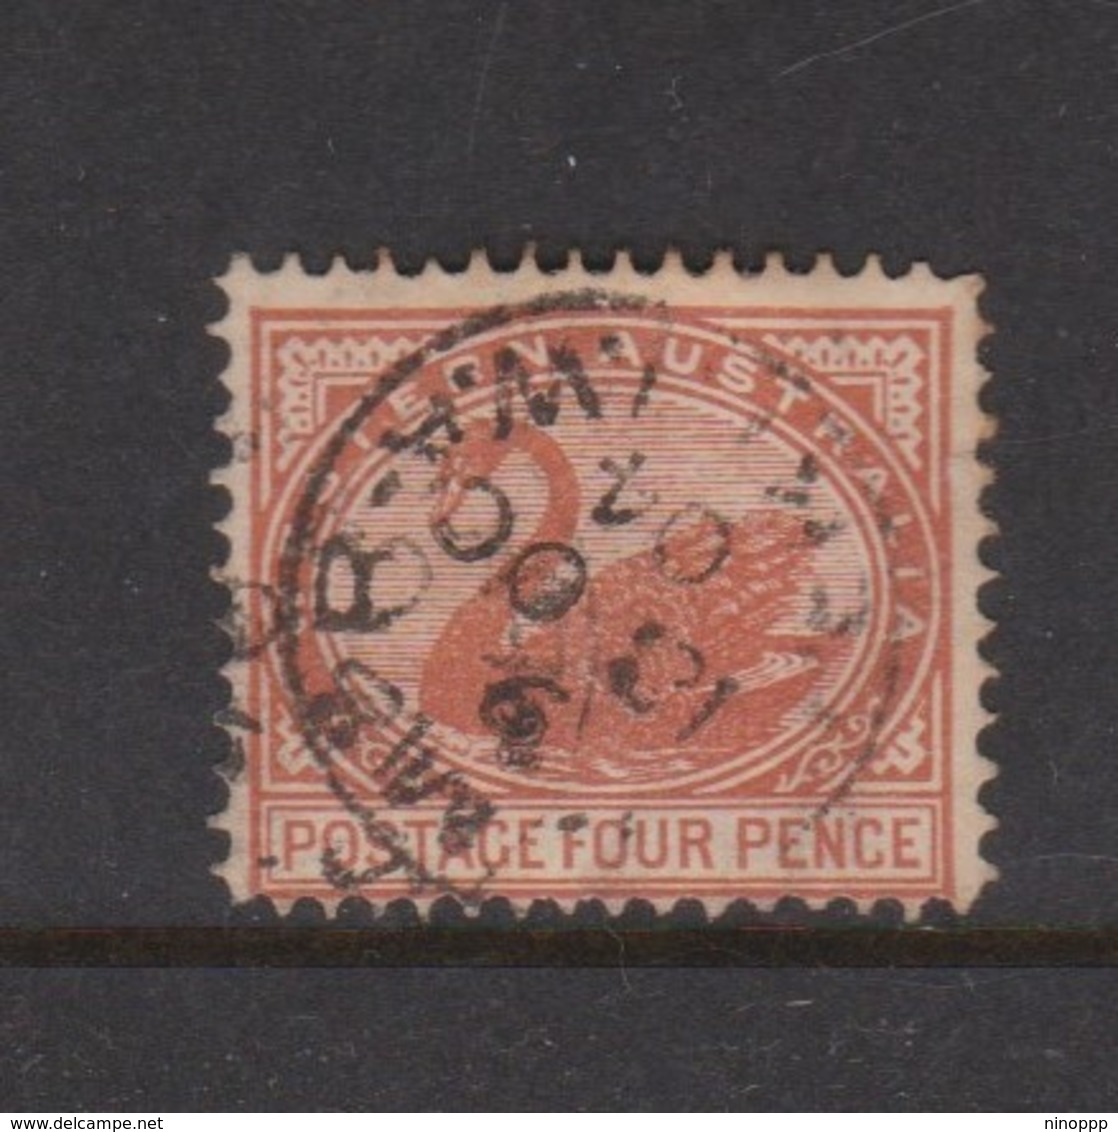 Australia-Western Australia SG 142 1905-12 Four Pence Brown Perf 12,used - Used Stamps